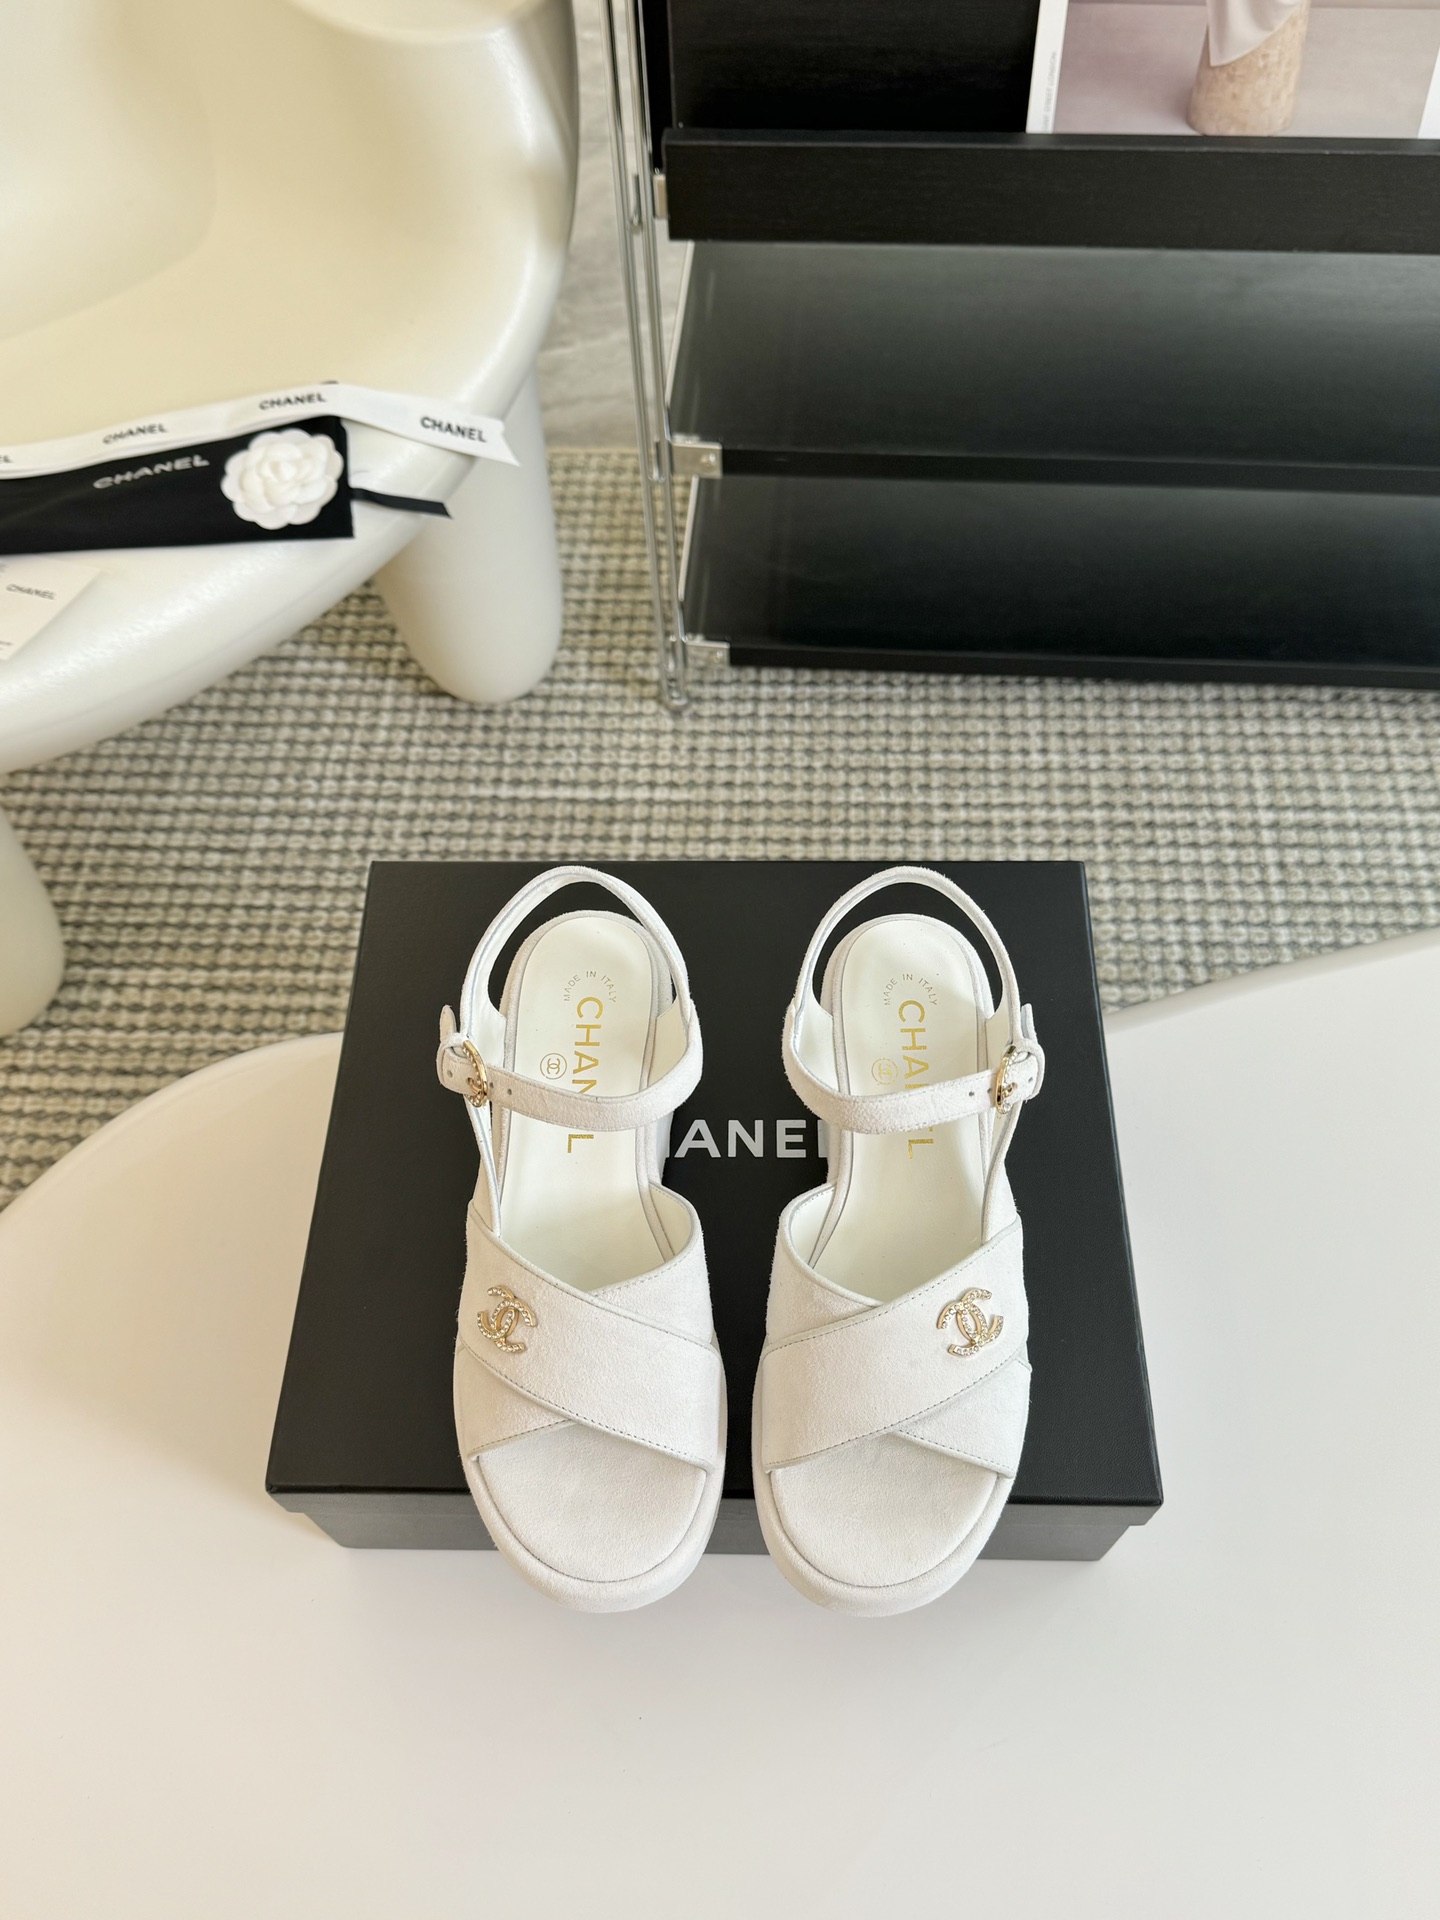 Chanel Shoes Sandals Top 1:1 Replica
 Embroidery Lambskin Sheepskin Spring/Summer Collection